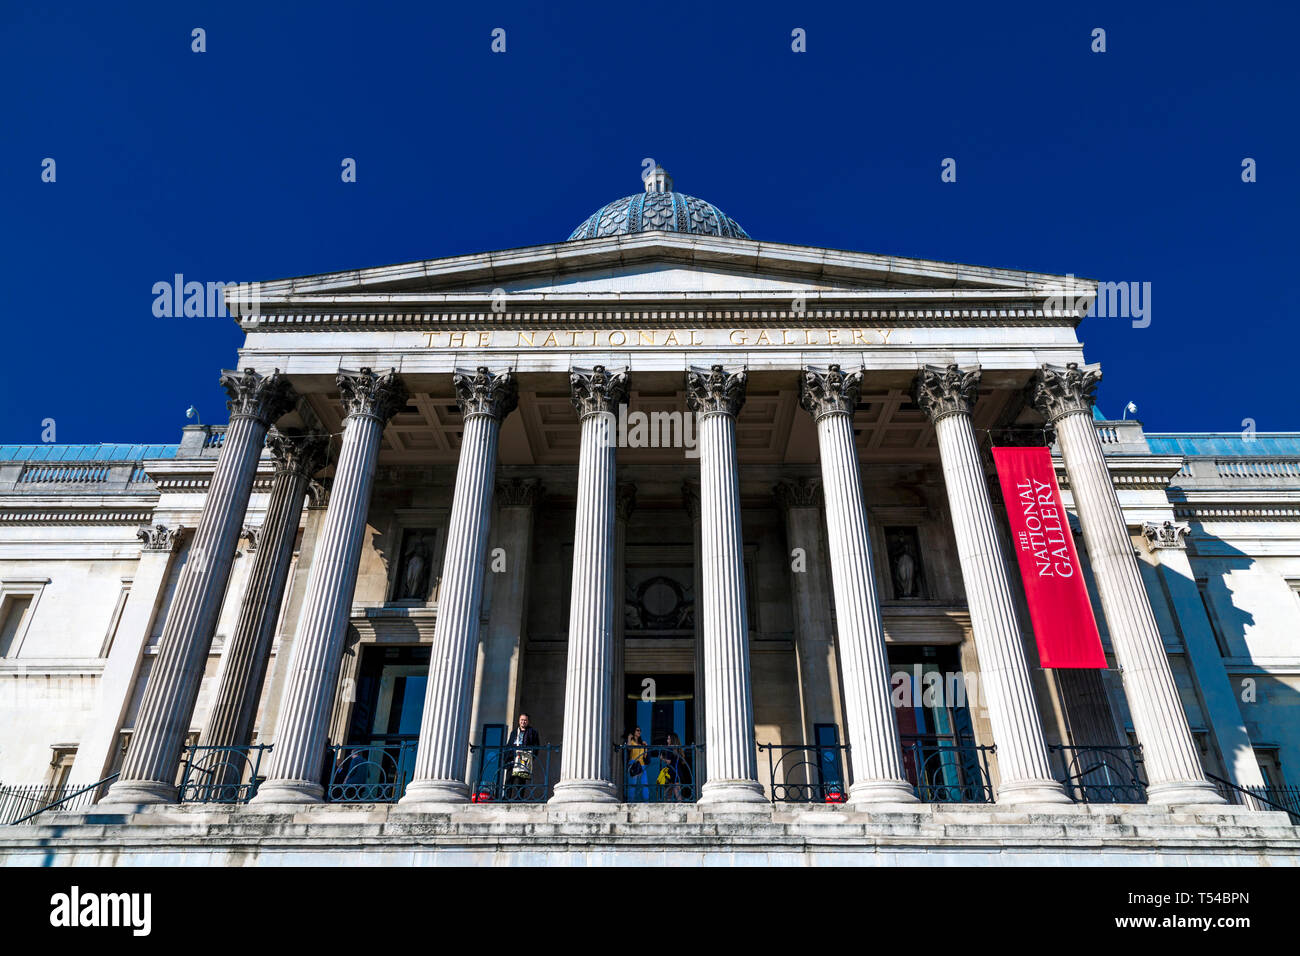 Exterior of the National Gallery in Trafalgar Square, London, UK Stock Photo